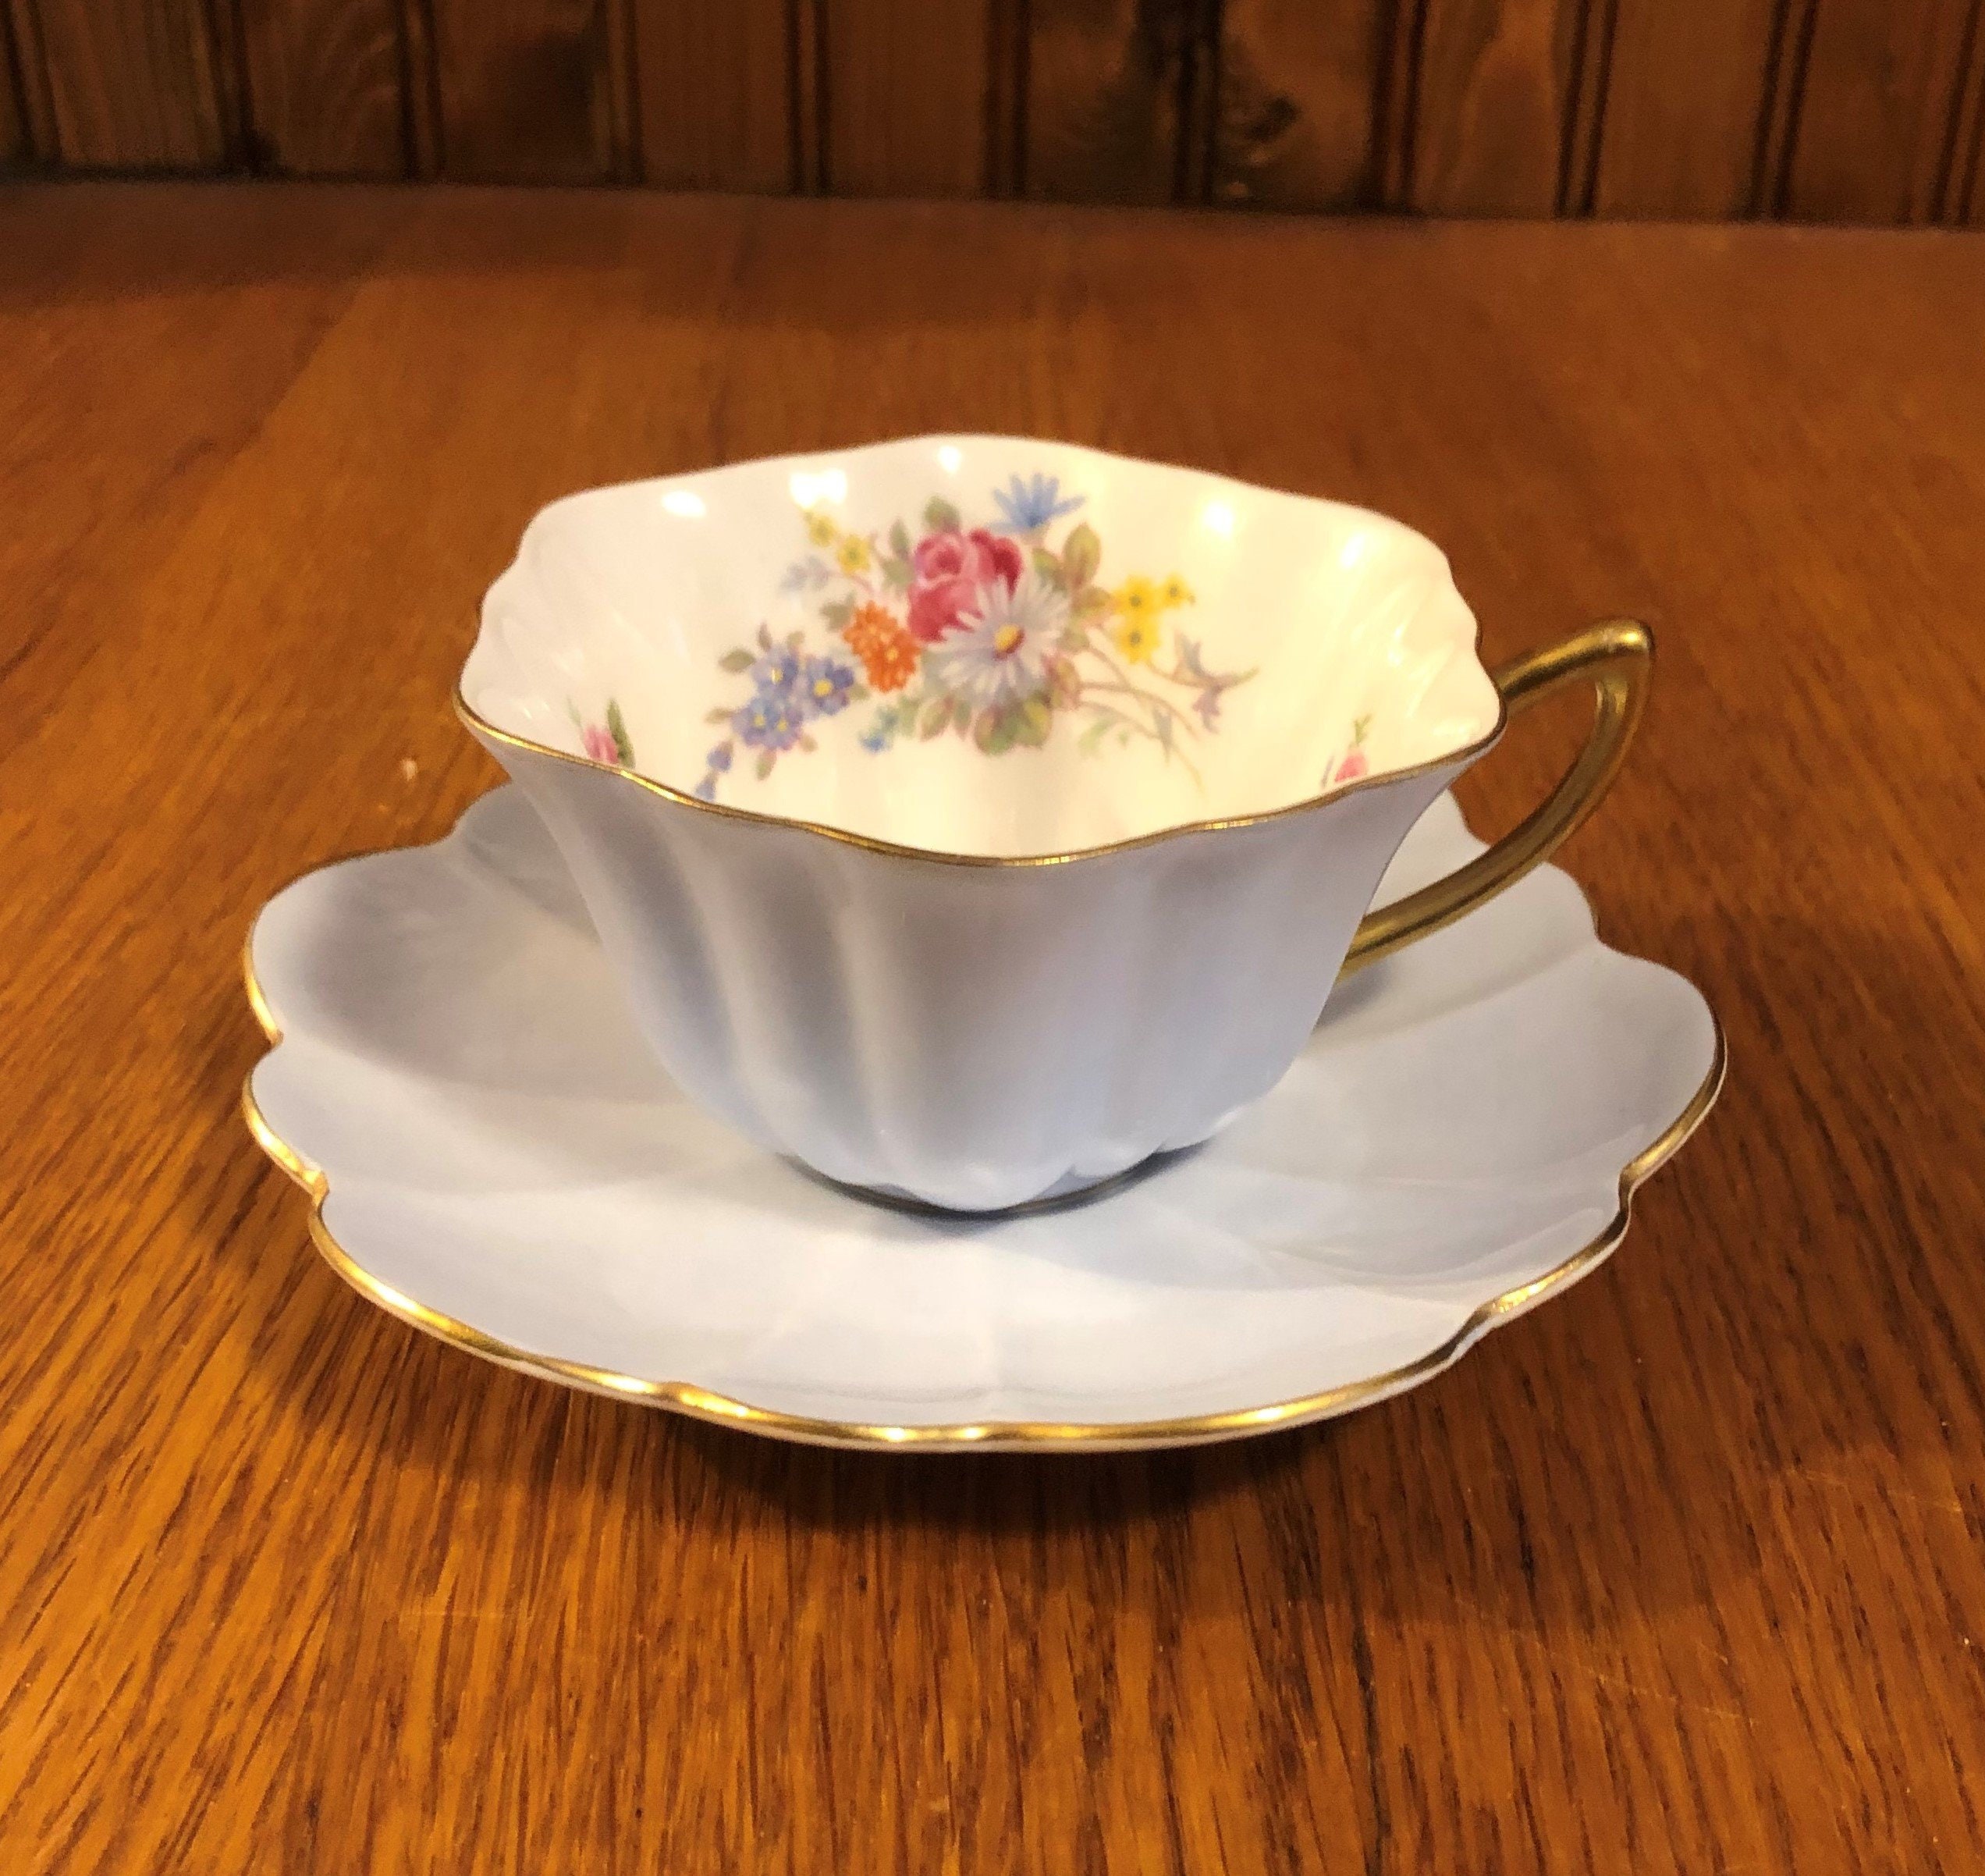 Shelley China Pale Blue Interior Floral Teacup and Saucer Shelley Vintage Tea Cup and Saucer